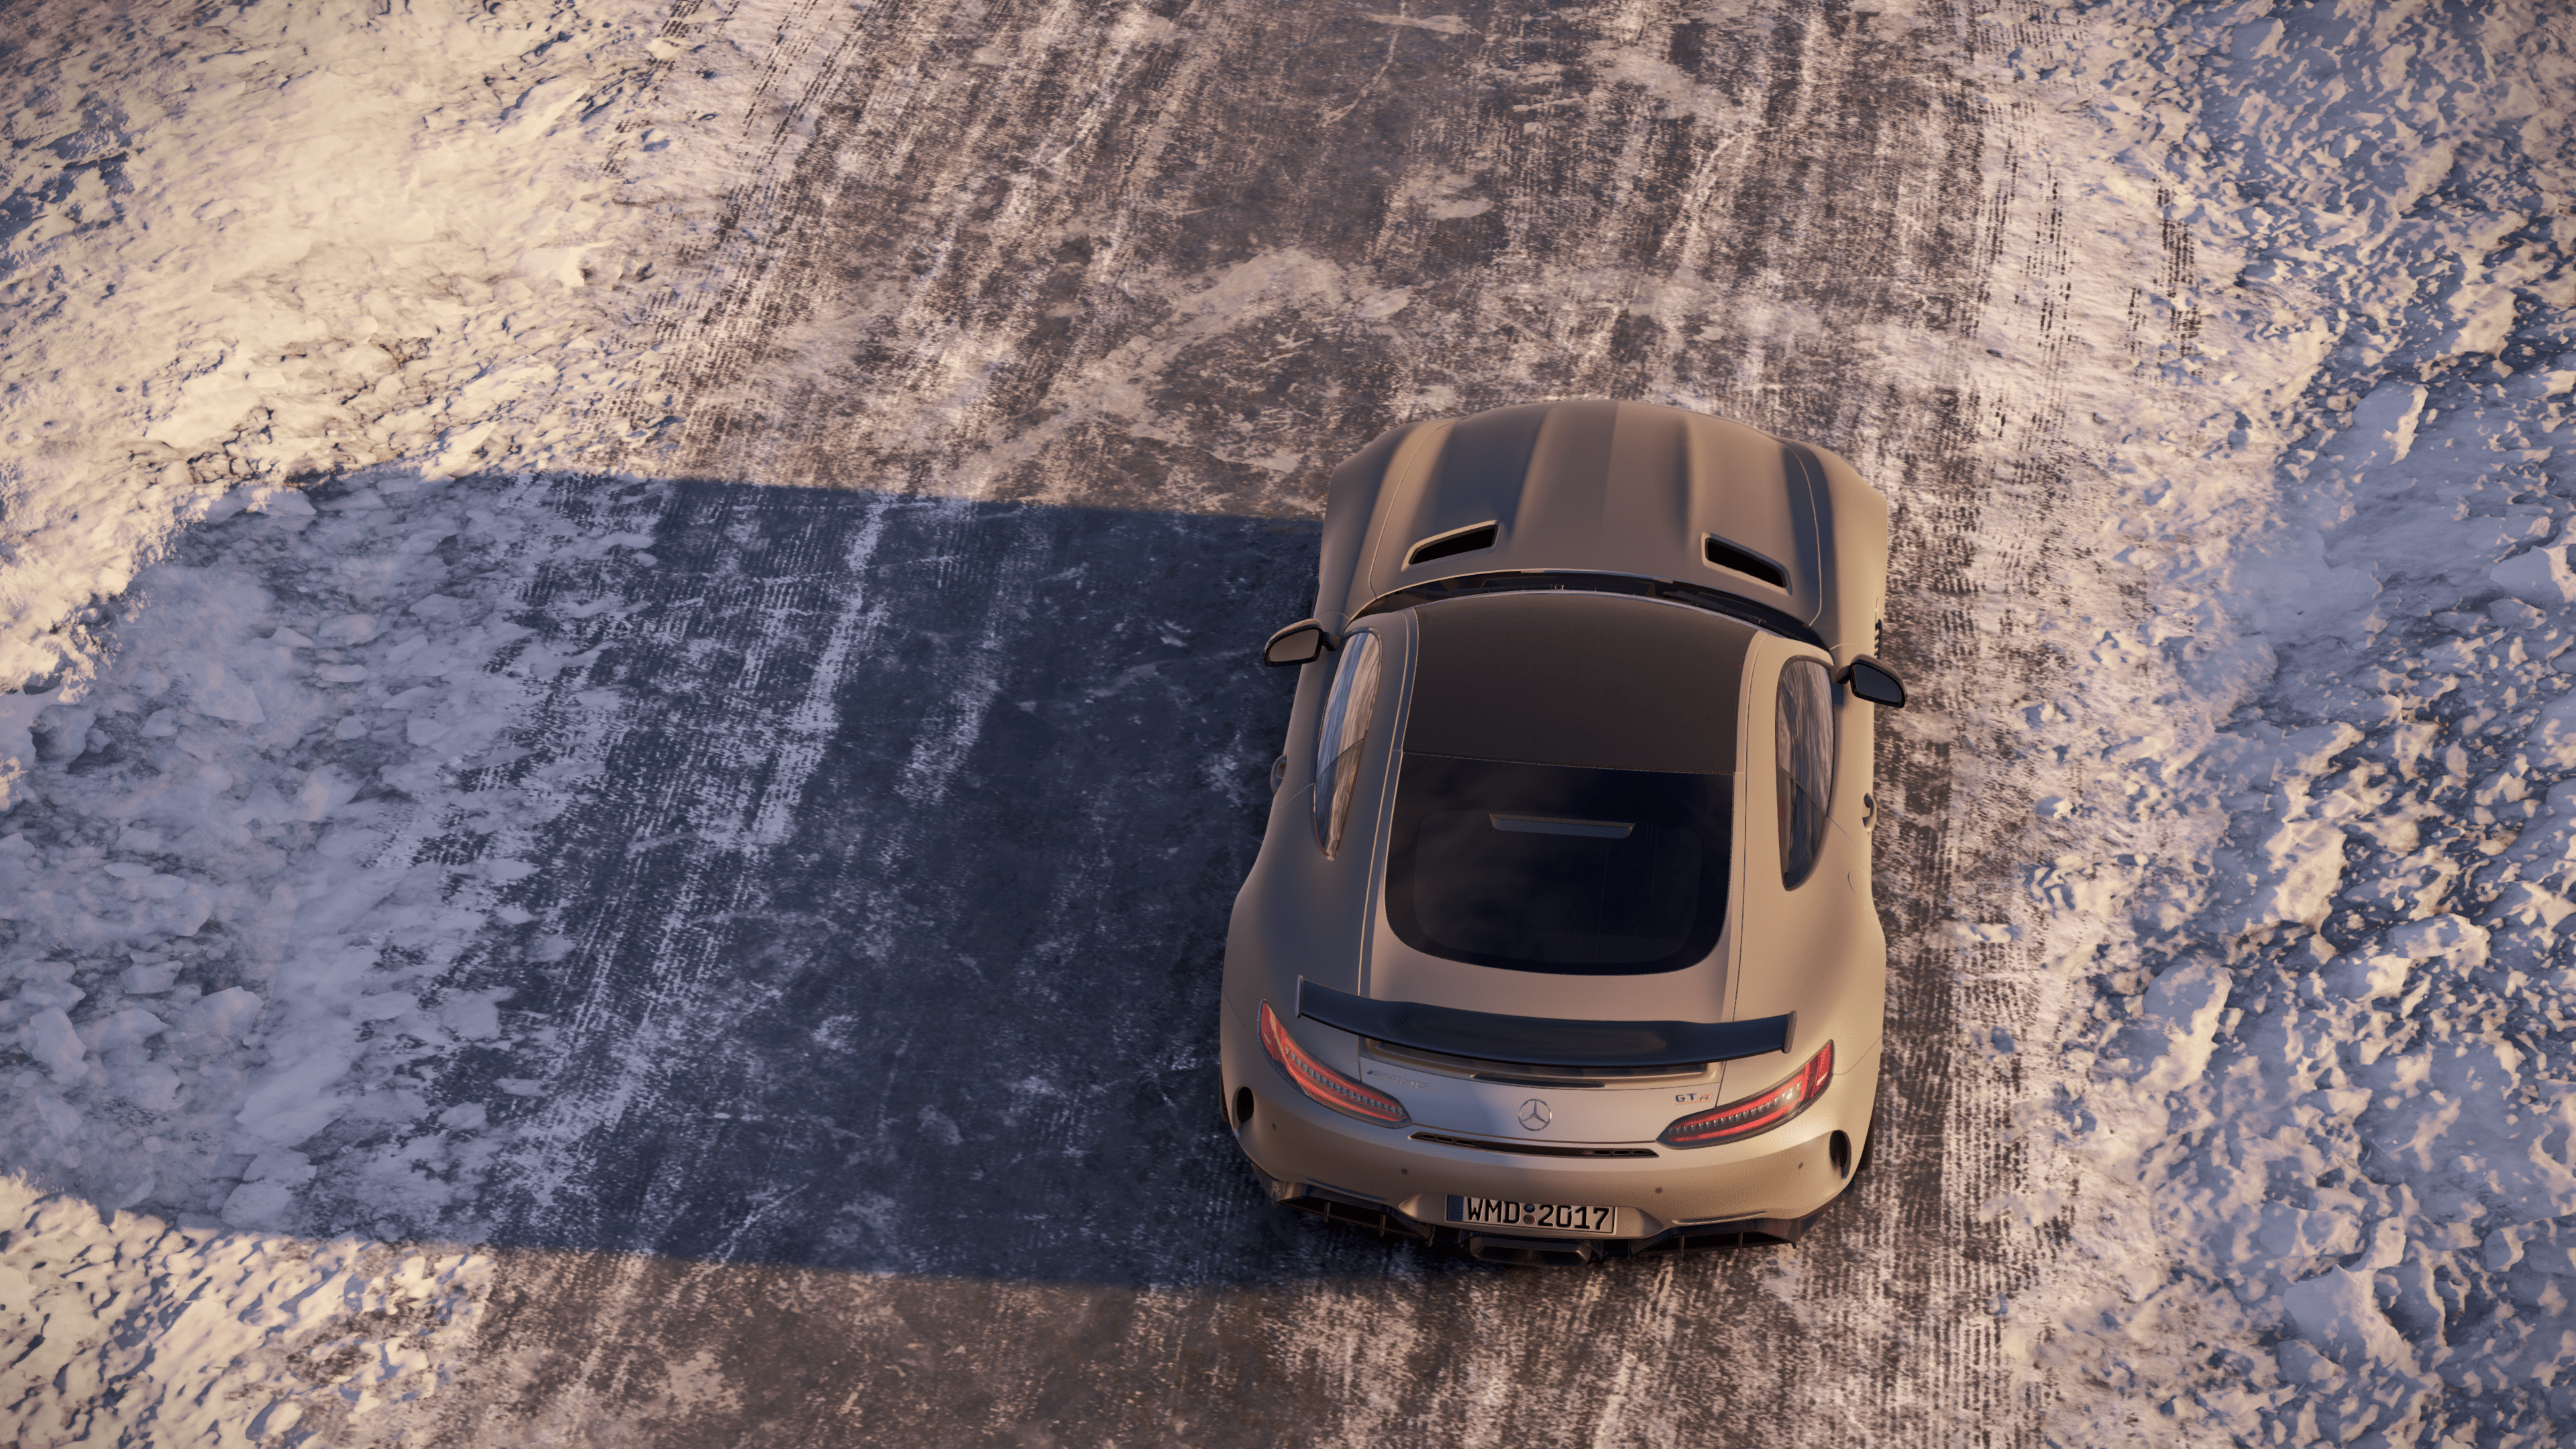 Mercedes AMG GT R Project CARS 2, HD Games, 4k Wallpapers ...